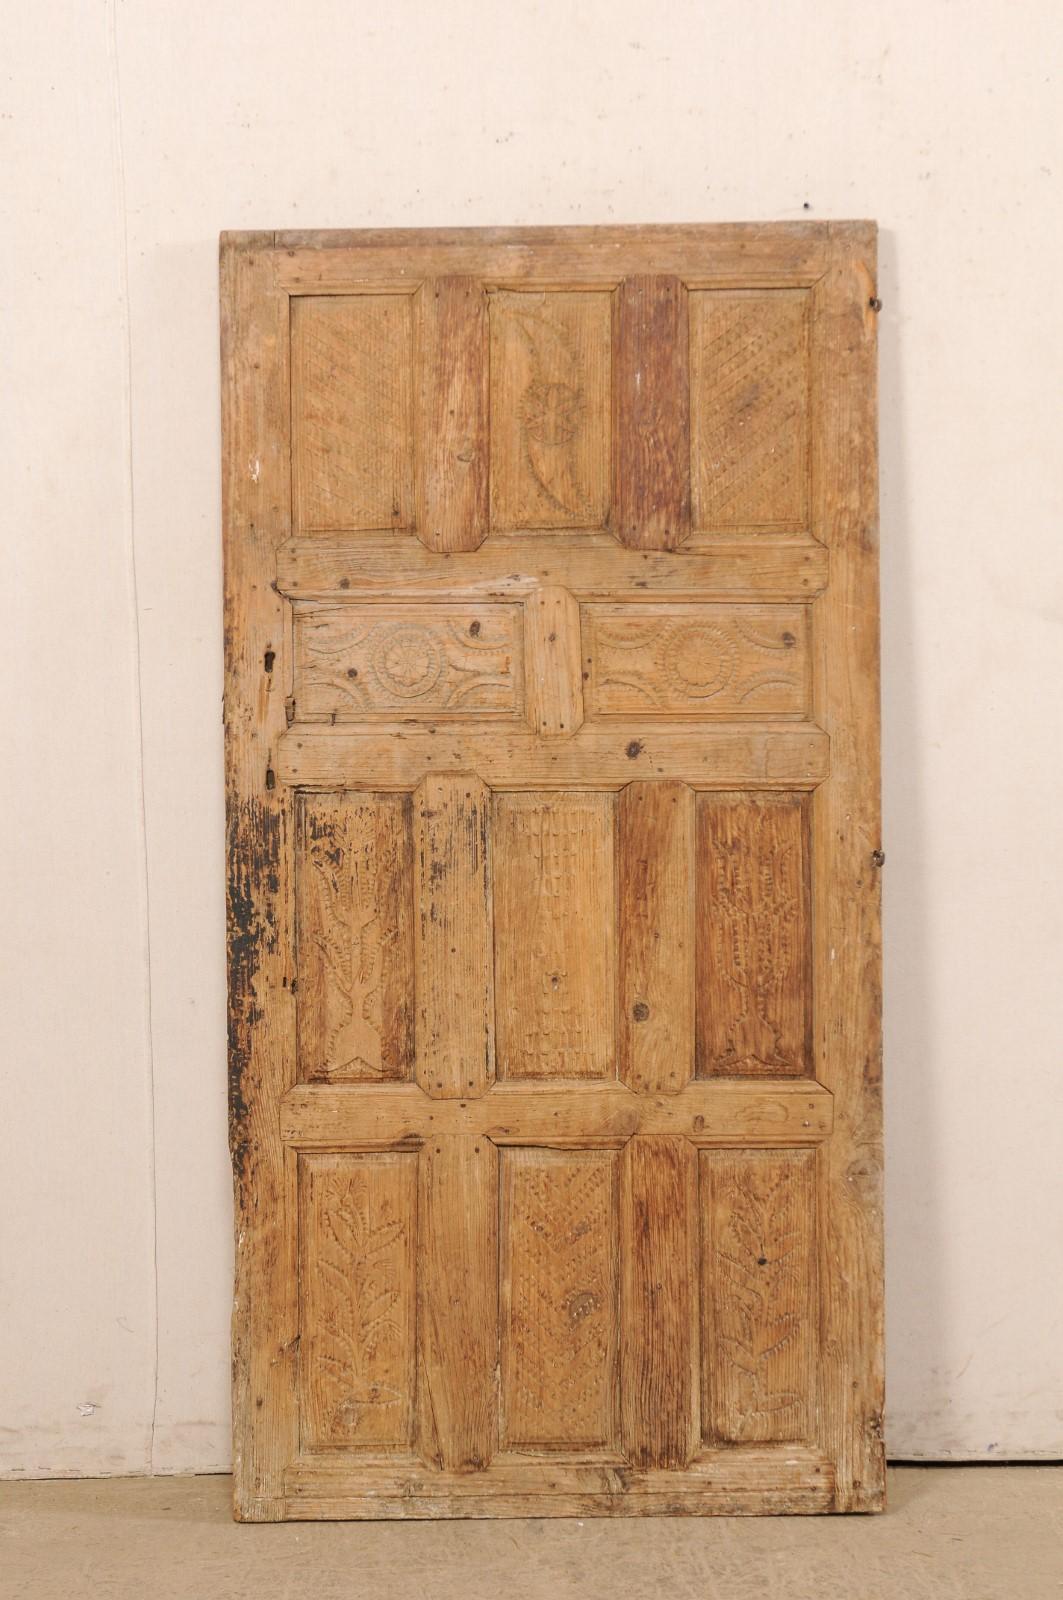 A single Turkish raised panel door from the 19th century. This antique door from Turkey has a nice 11 raised panel design on its front side, with beautifully-rustic hand-carved and notched designs adorning each of the panels. The door is shorter